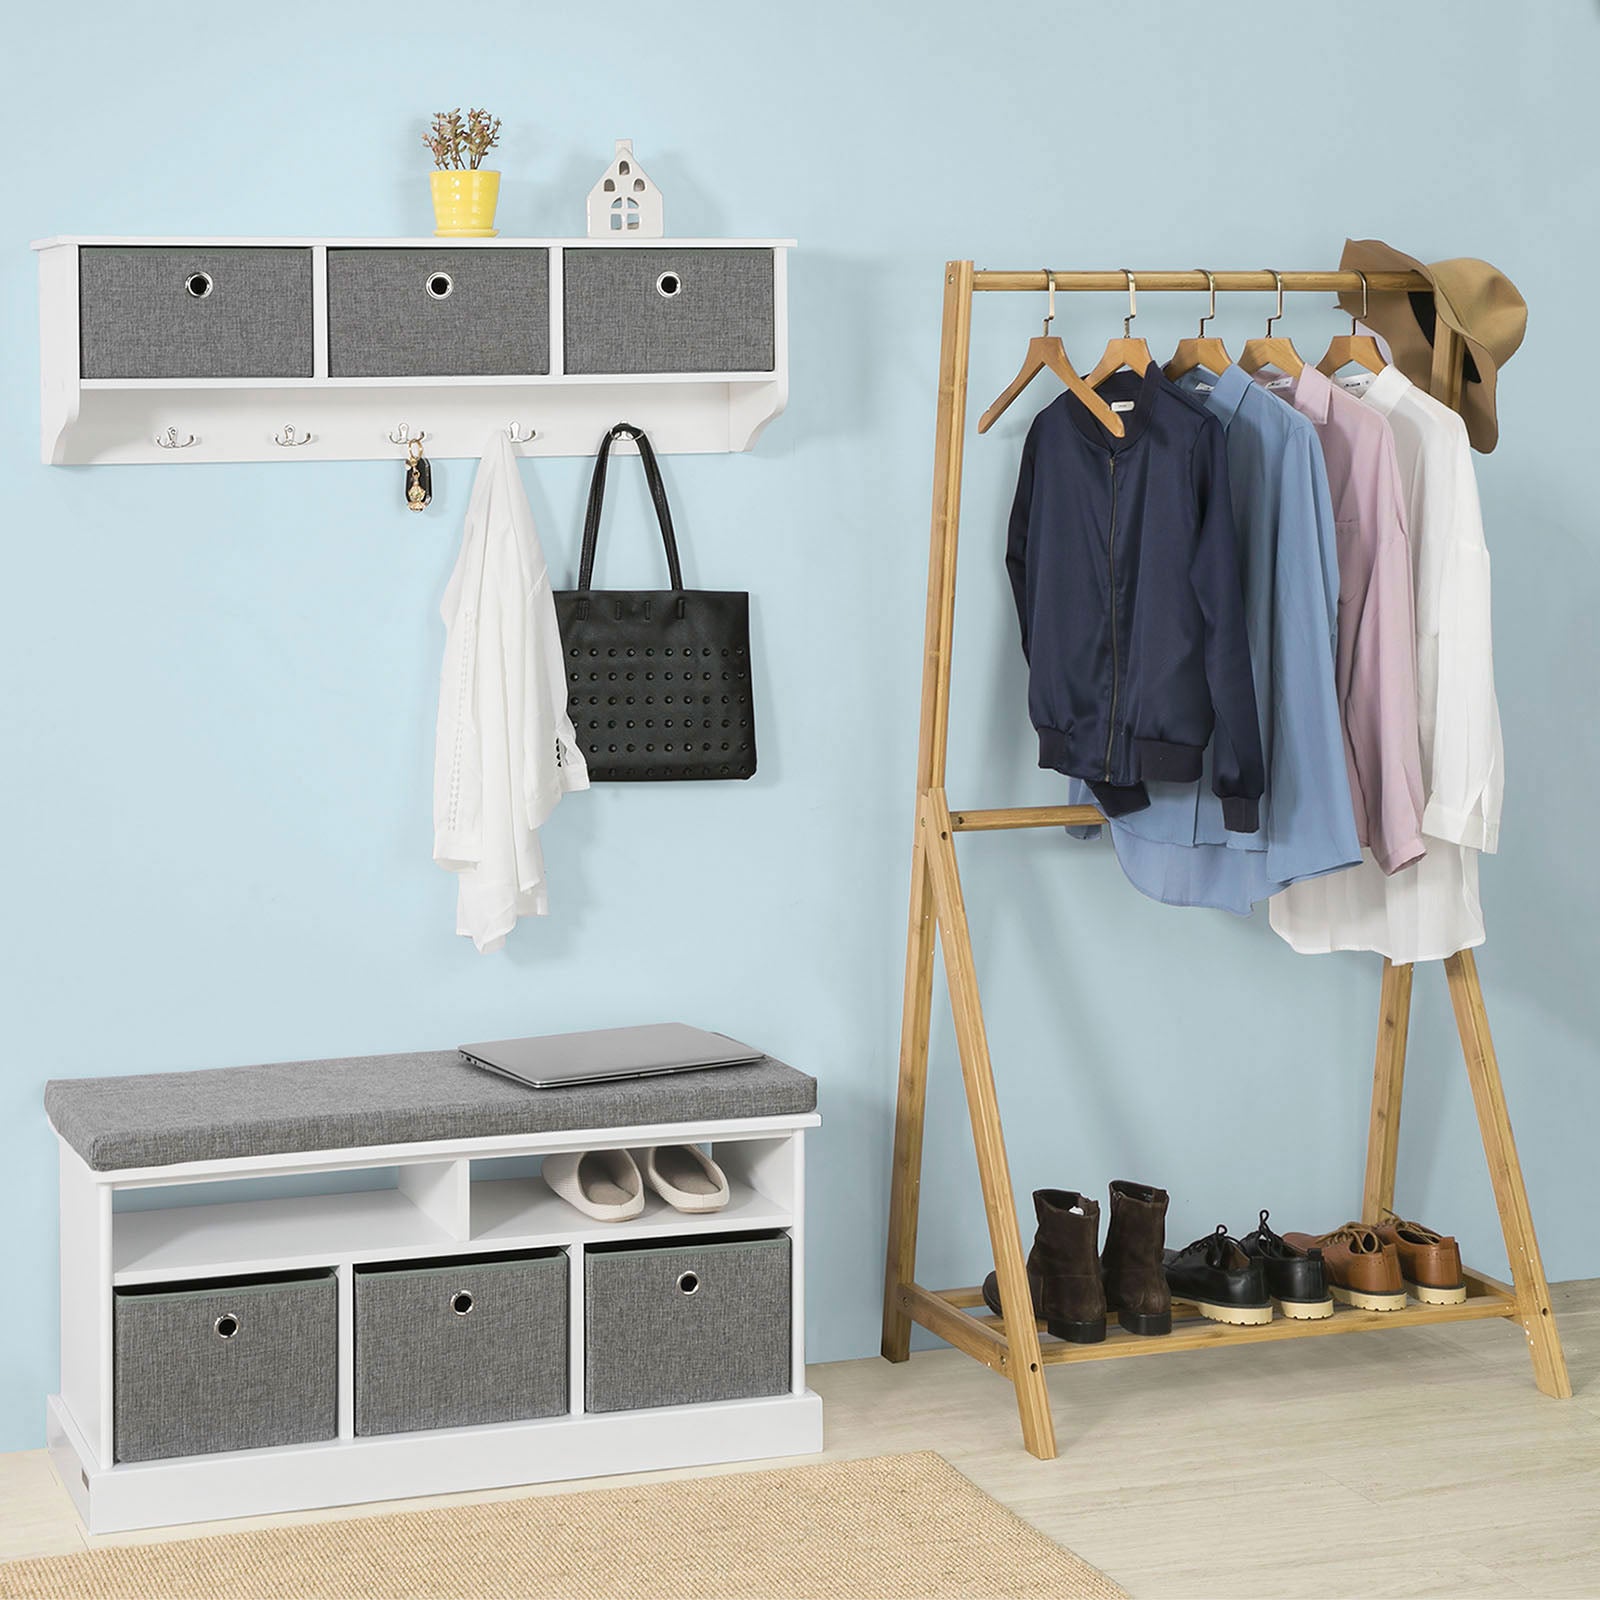 SoBuy FSR67-HG,Storage Bench with 3 Fabric Drawers and Seat Cushion,Hallway Shoe Bench,Shoe Cabinet